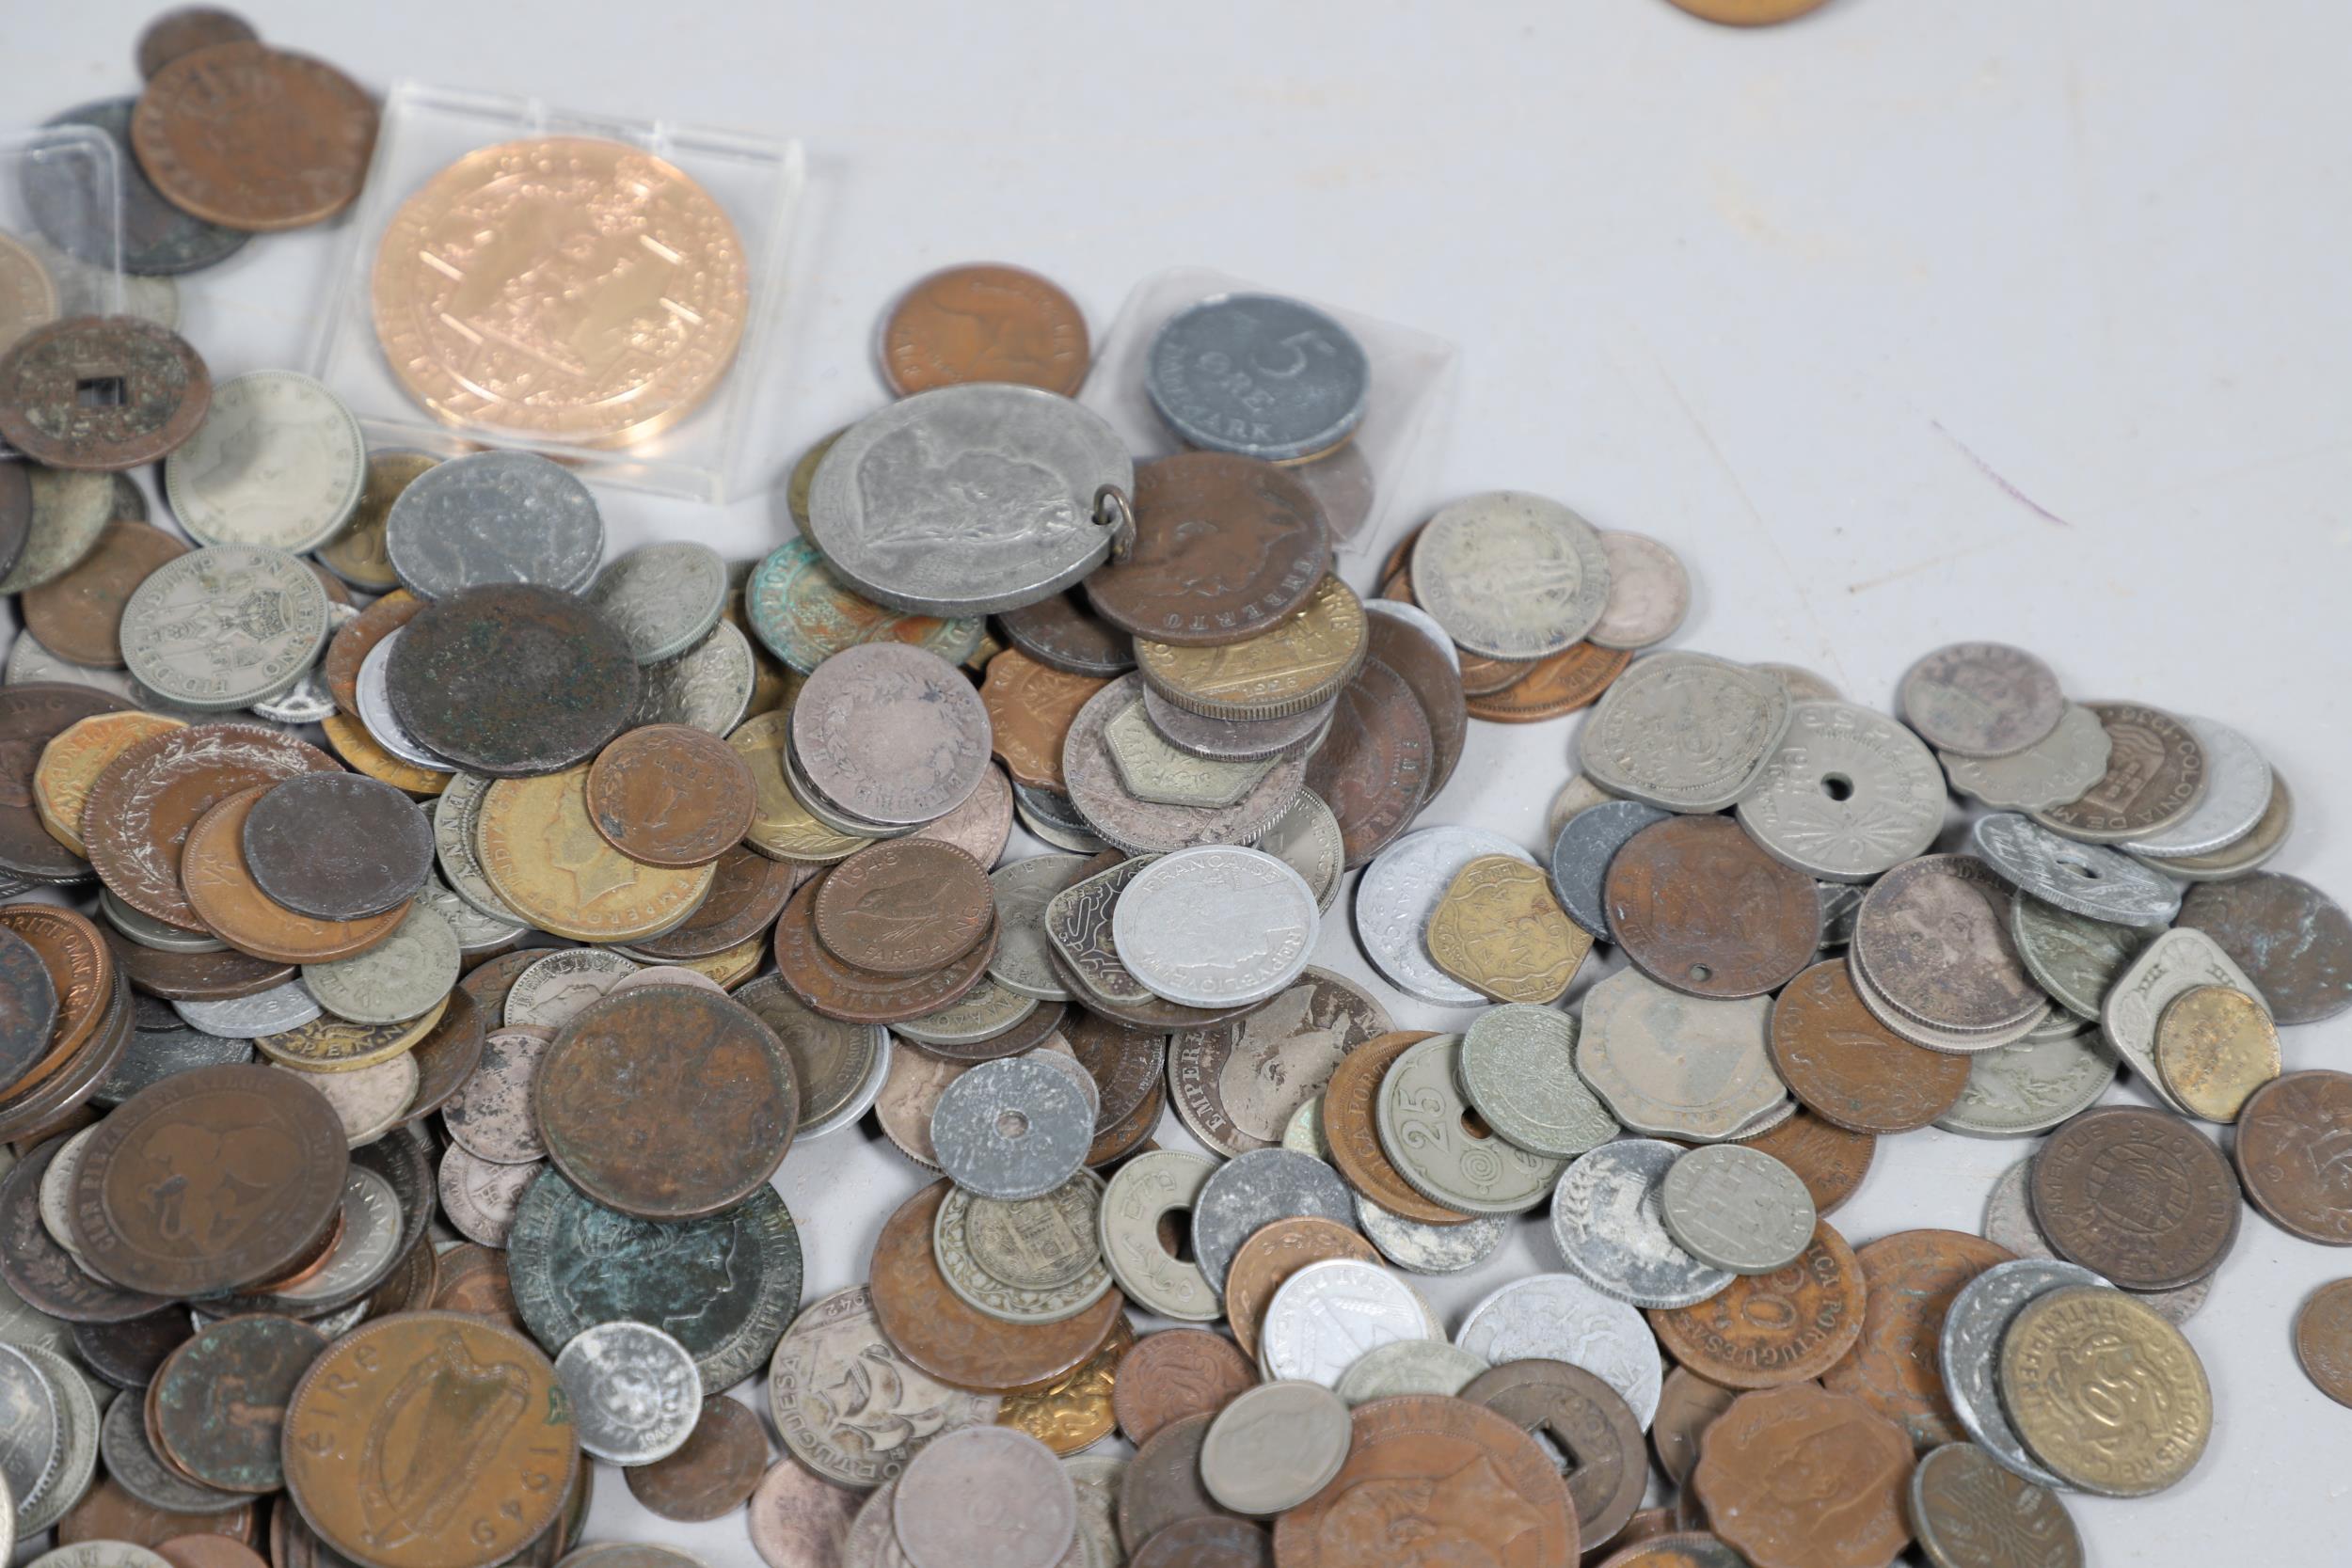 A LARGE COLLECTION OF WORLD COINS AND SIMILAR BRITISH COINS. - Image 10 of 20